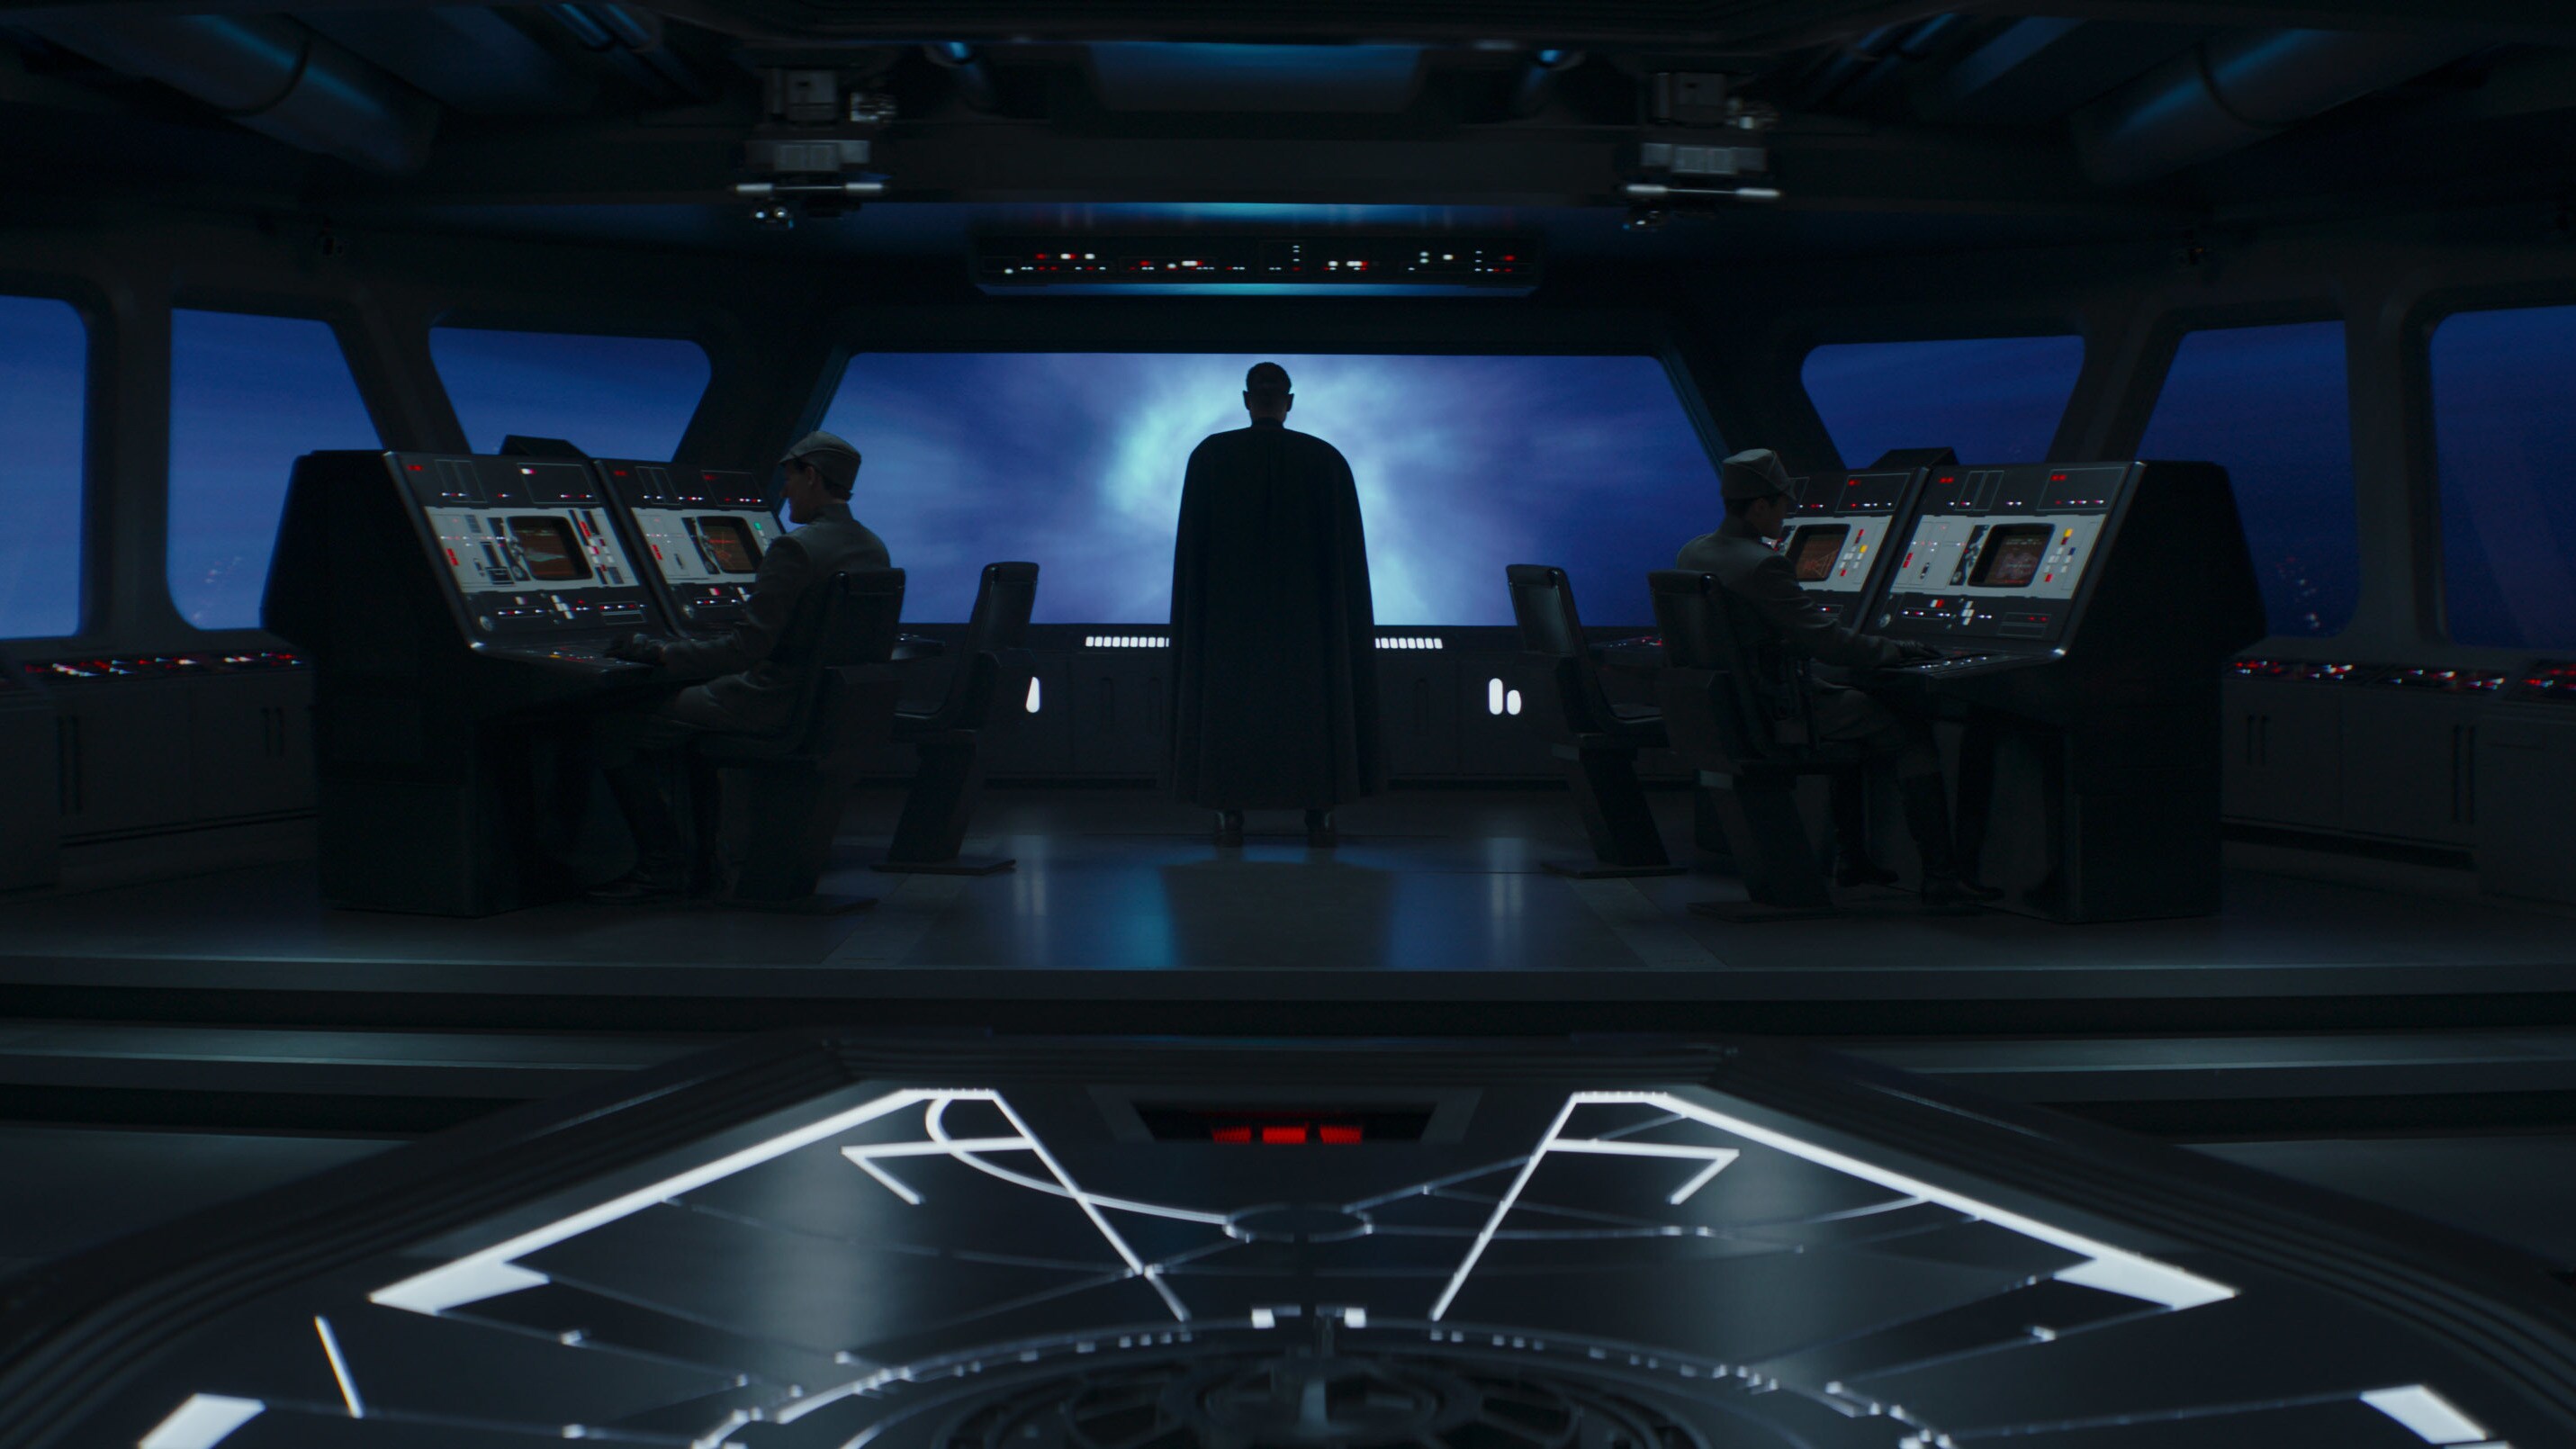 (Center): Giancarlo Esposito is Moff Gideon in Lucasfilm's THE MANDALORIAN, season two, exclusively on Disney+. © 2020 Lucasfilm Ltd. & ™. All Rights Reserved.